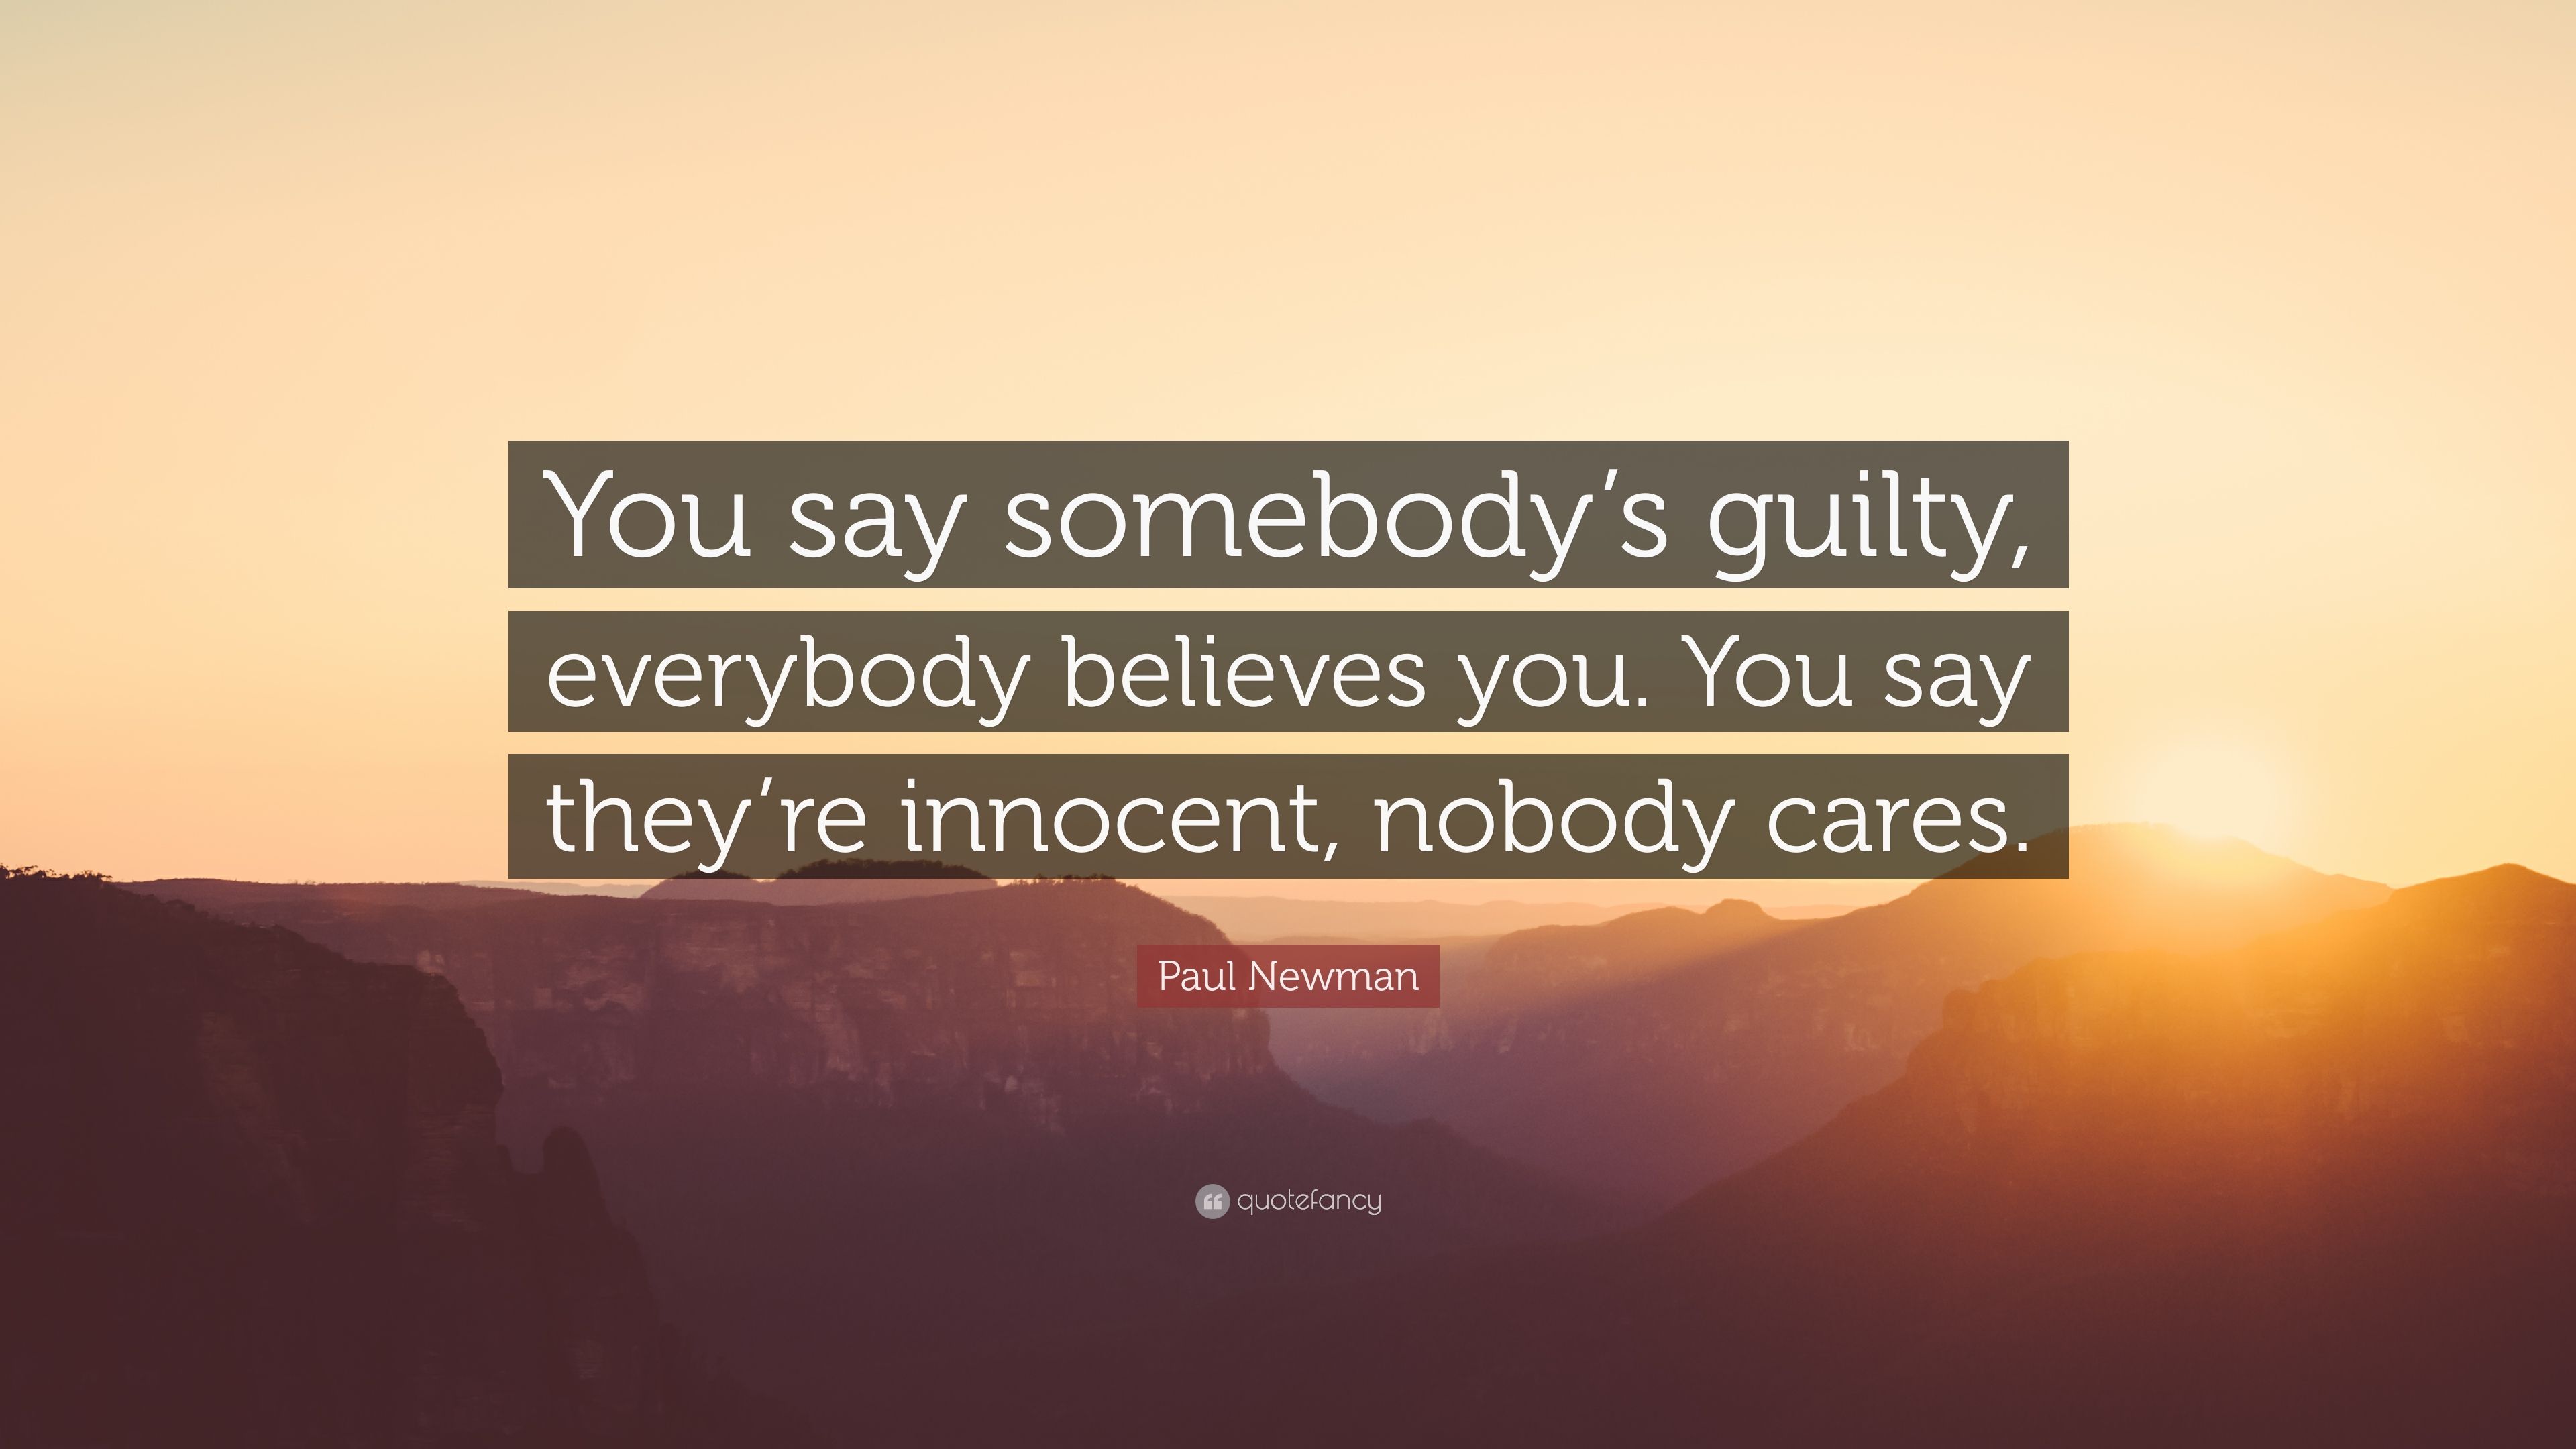 Paul Newman Quote: “You say somebody's guilty, everybody believes